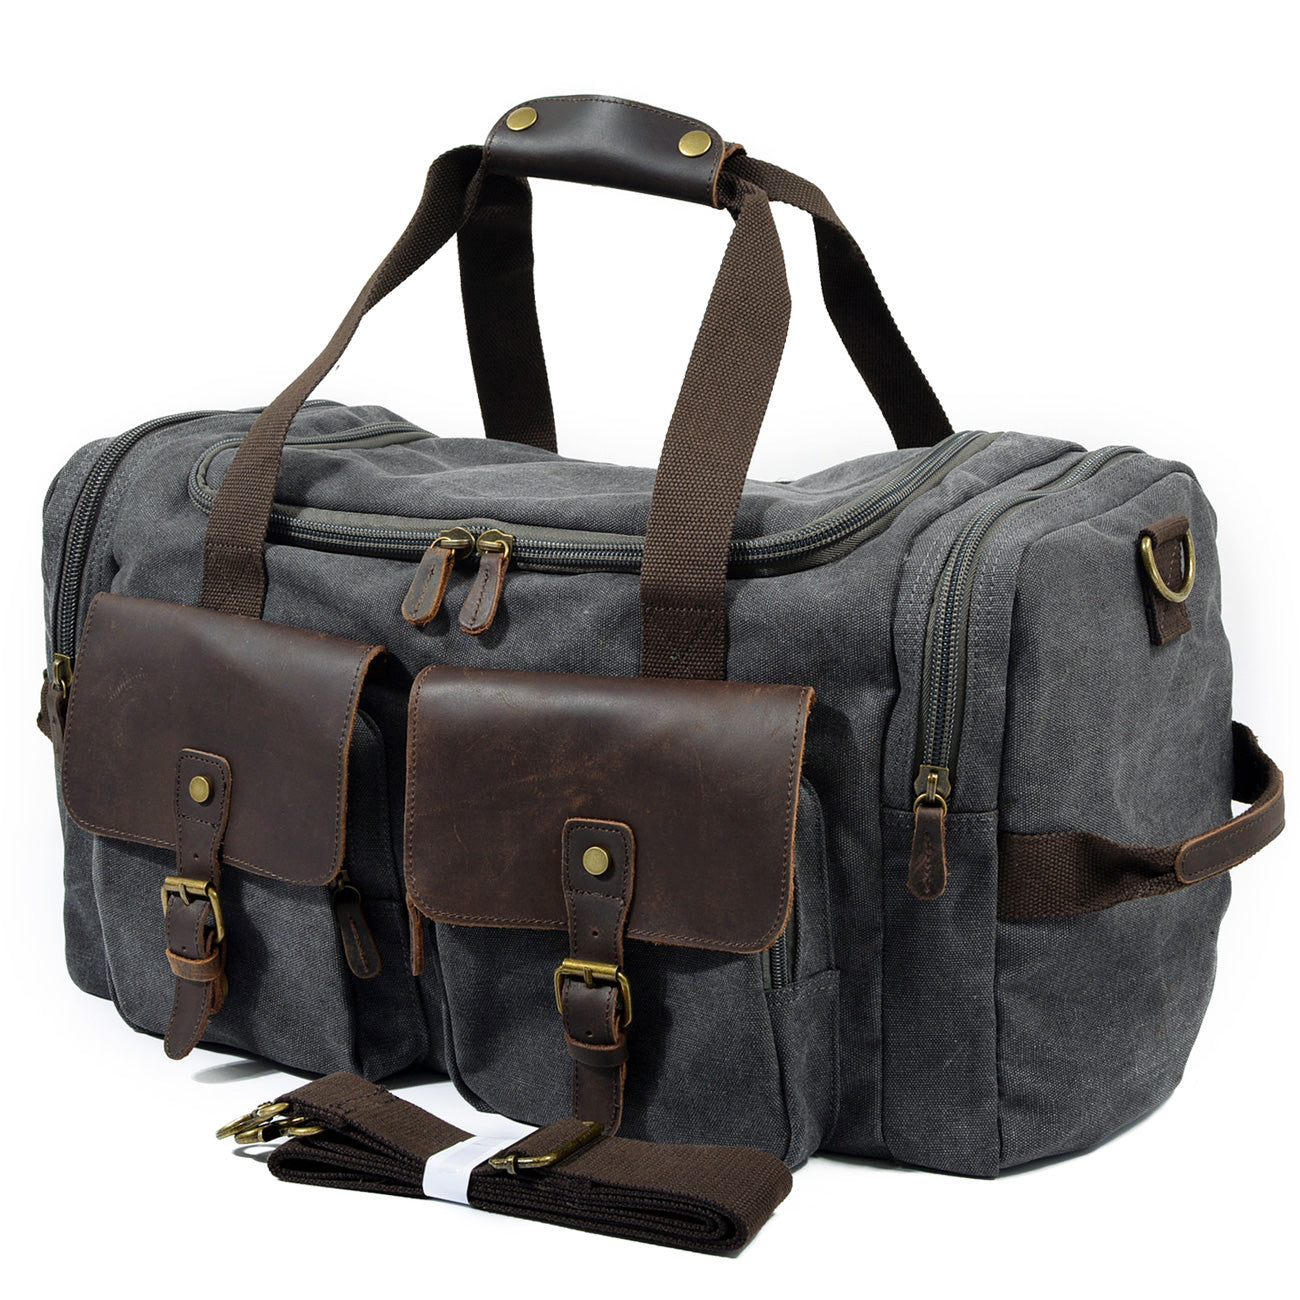 foldable weekend carry-on bag with reinforced zippers